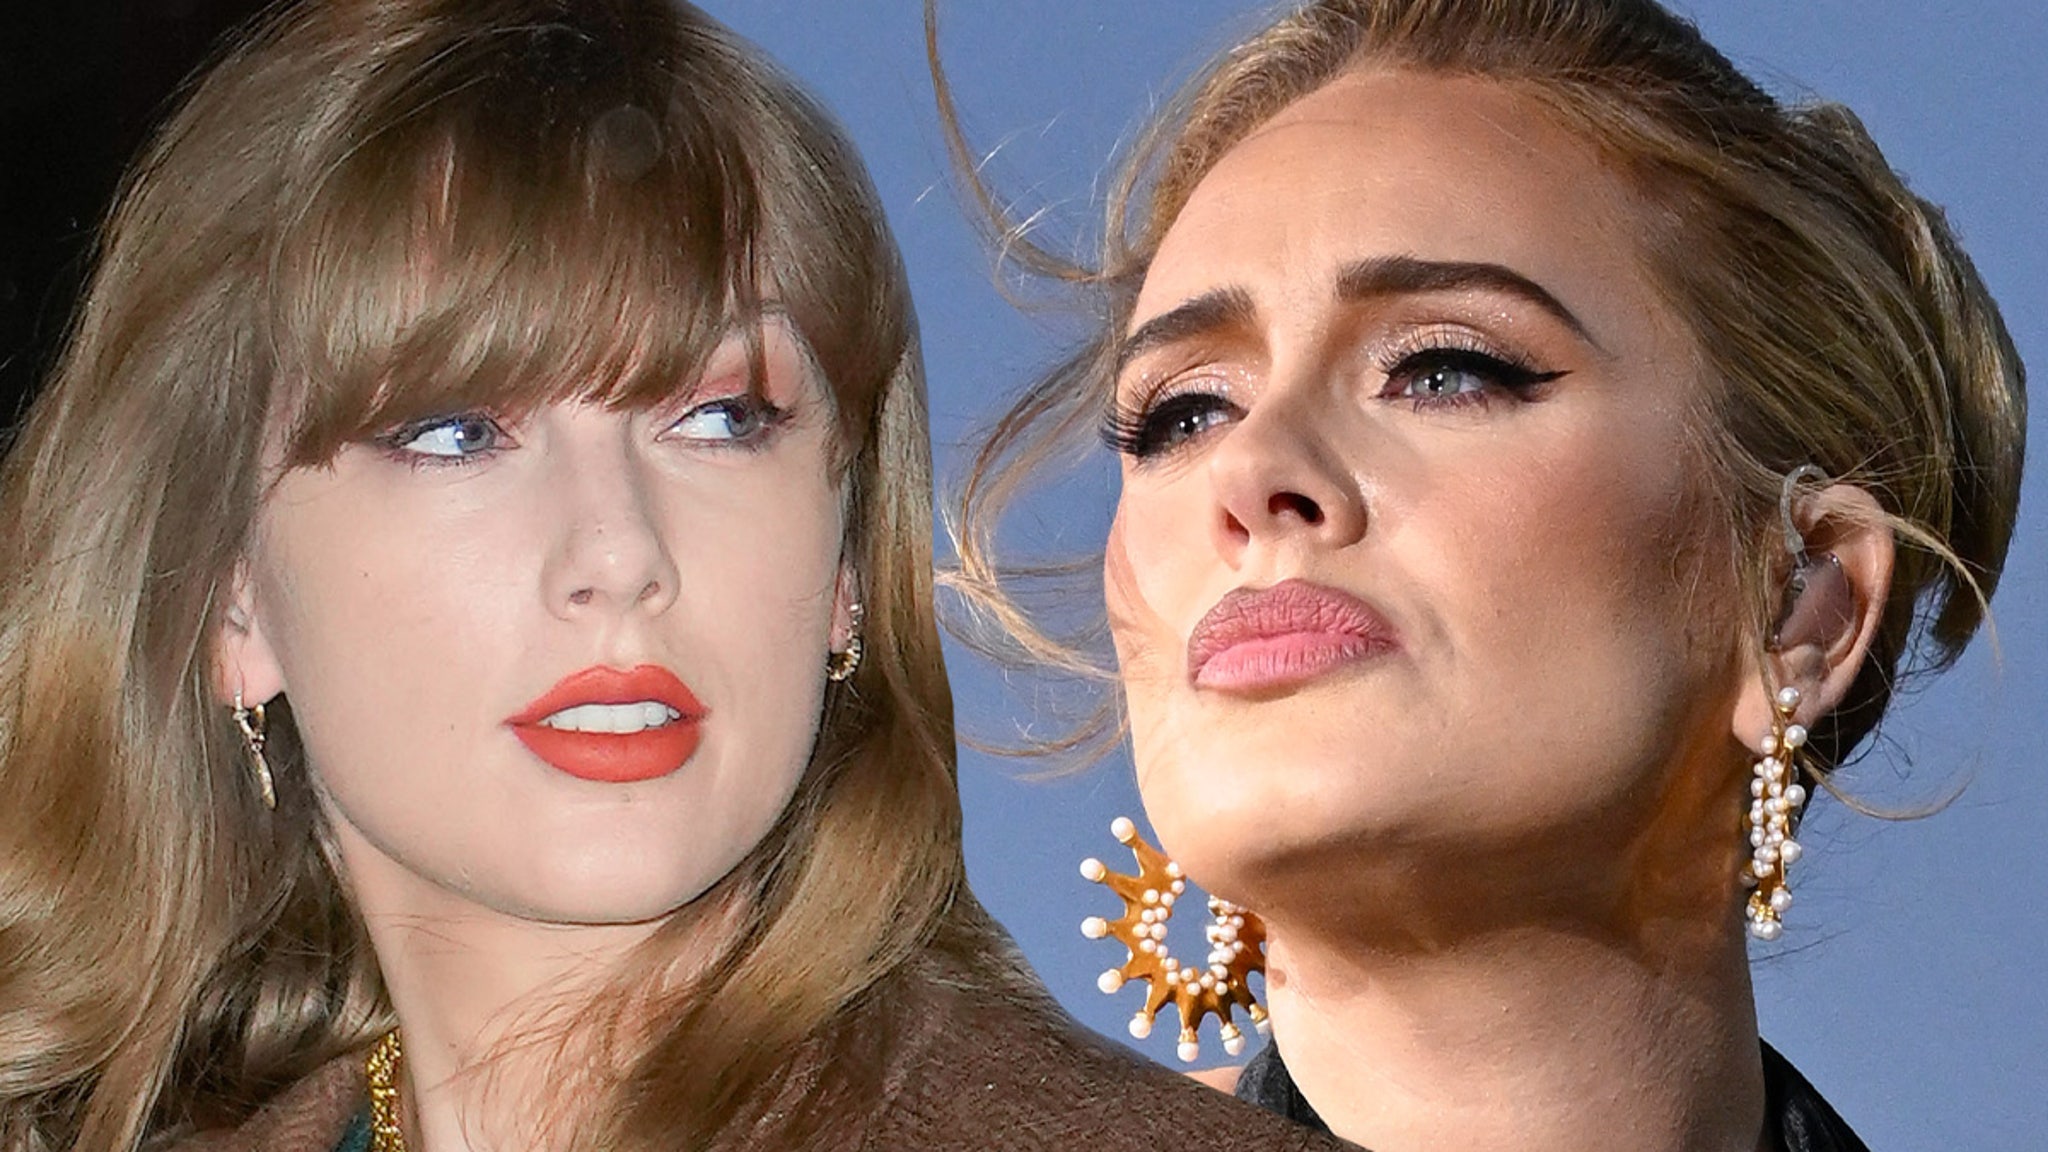 rolling-stone-writer-says-taylor-swift-is-the-'better-adele'-after-new-album